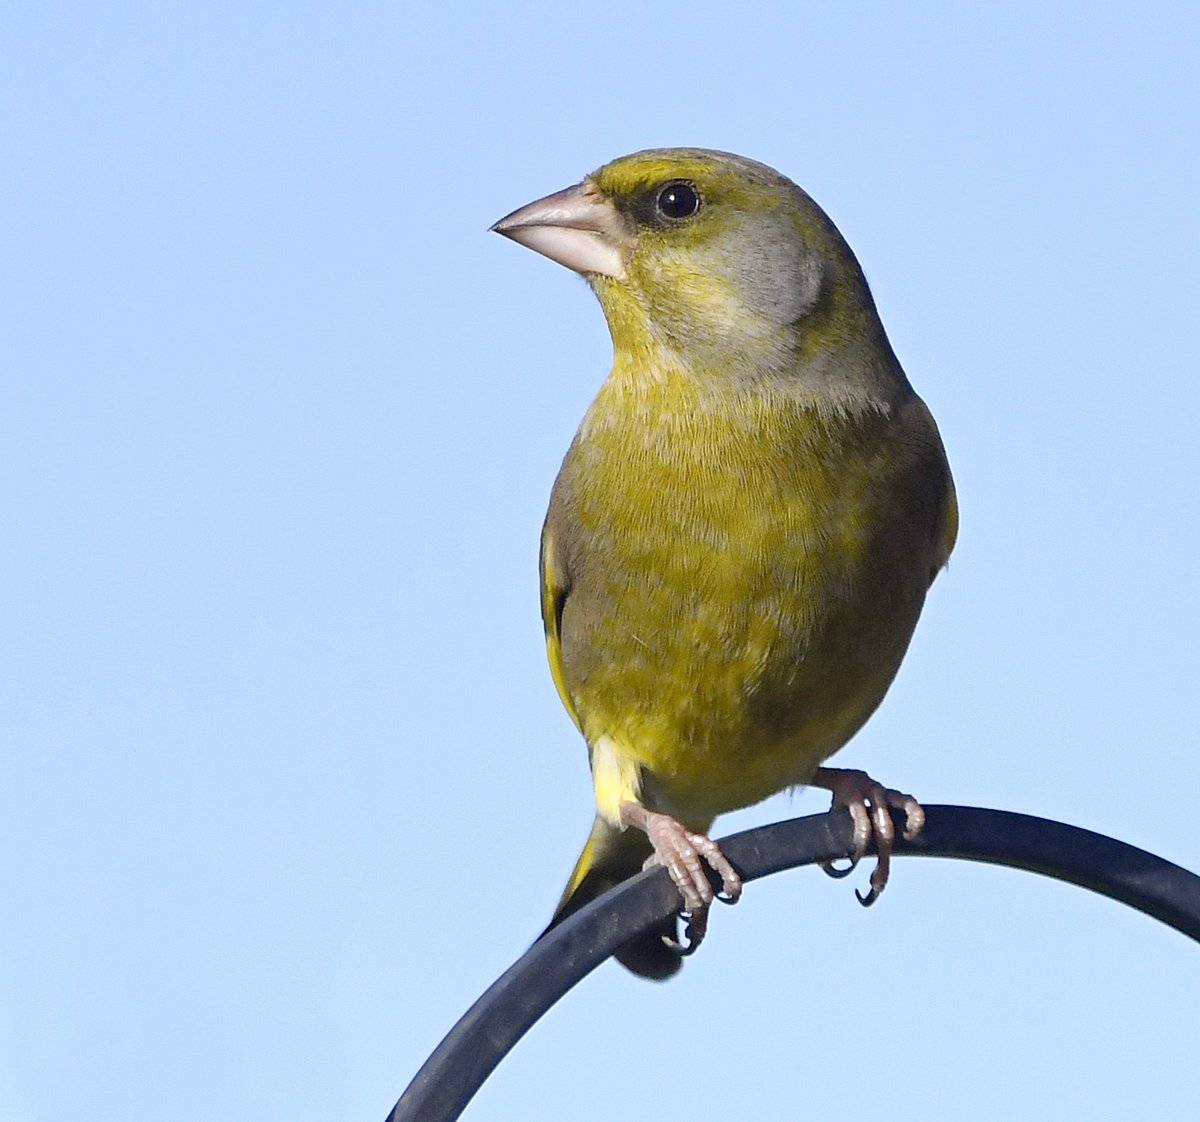 Greenfinch Previously common finch, a bad virus hit them badly, depleting their numbers. Numbers in some places seem to be slowly recovering.Males are a brighter green than the duller females.They love sunflower hearts! #SelfIsolationBirdWatch 